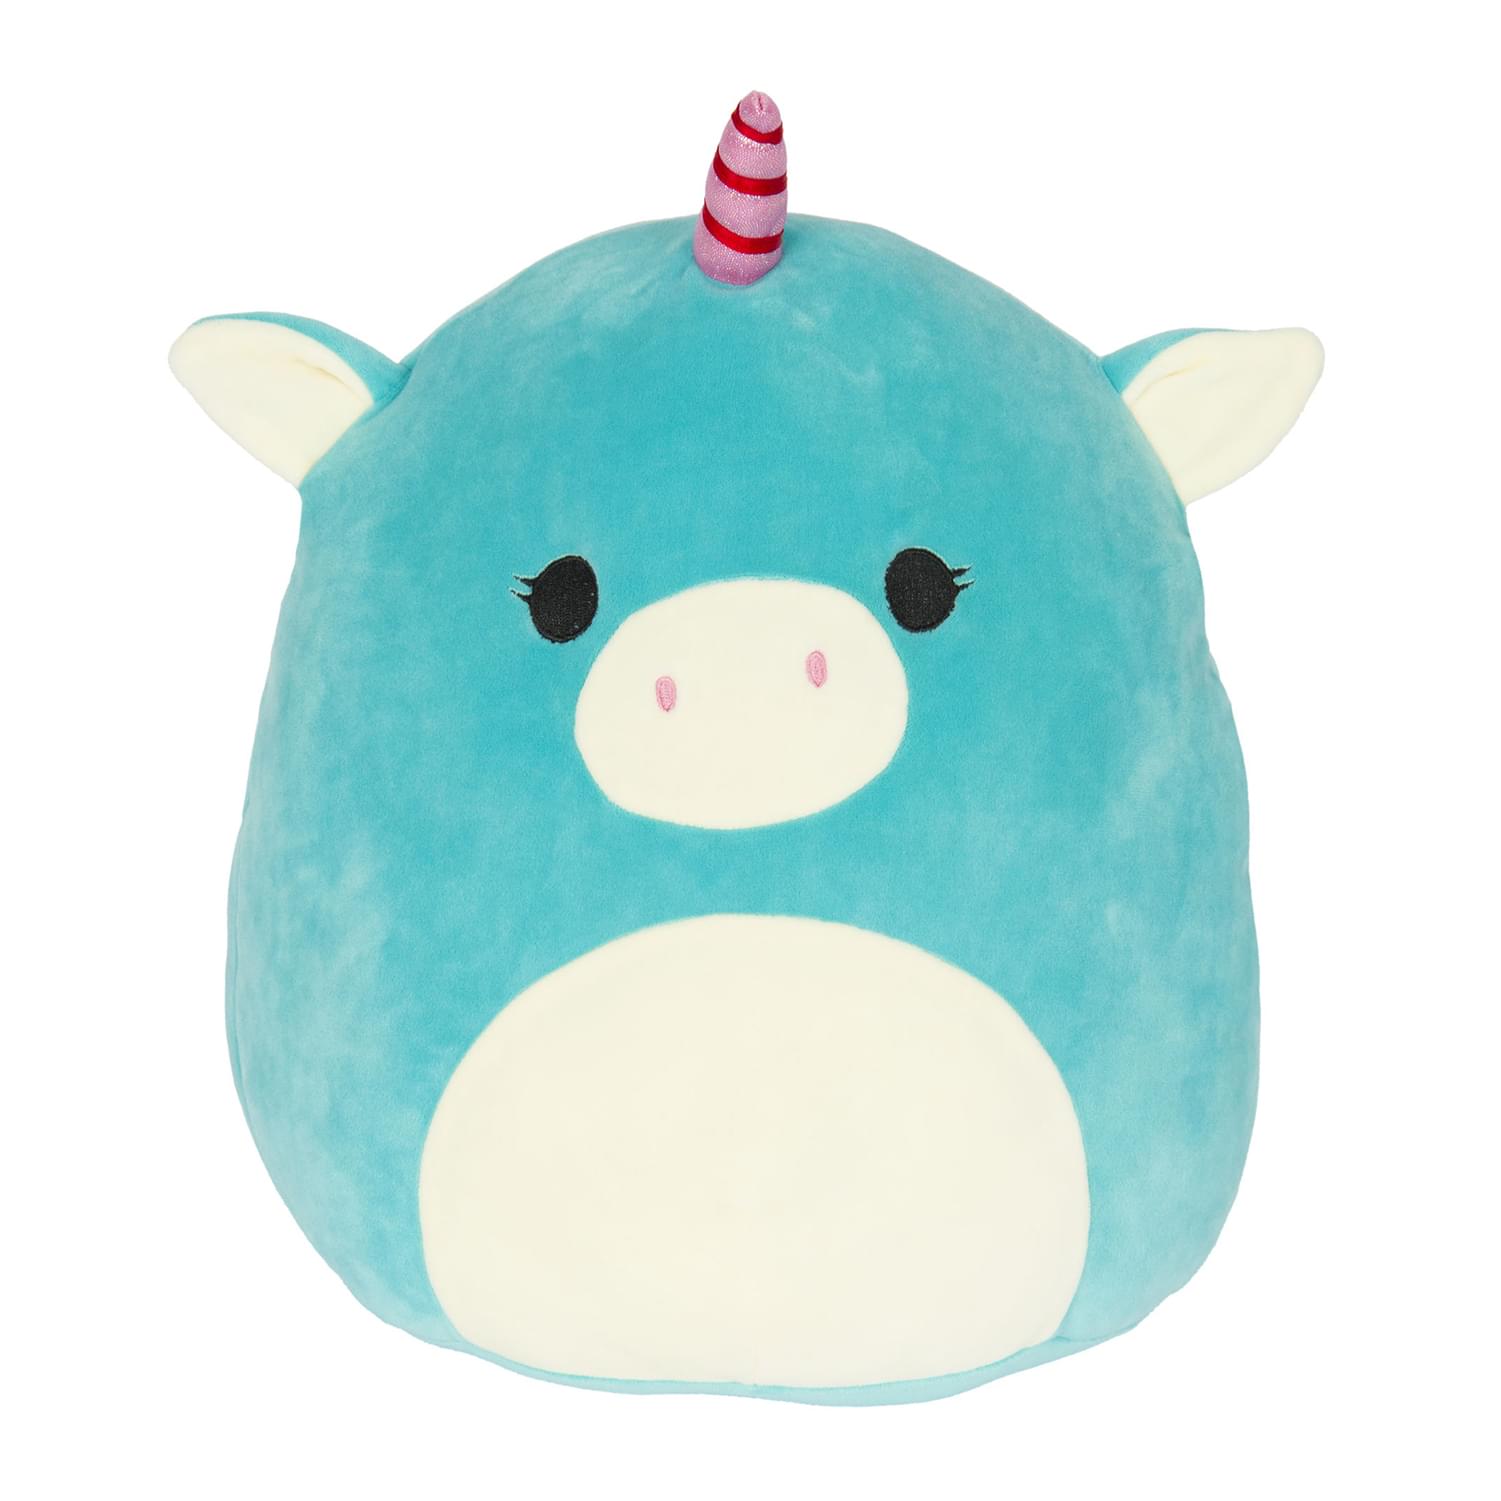 Squishmallow 16 Inch Pillow Plush | Ace the Turquoise Unicorn